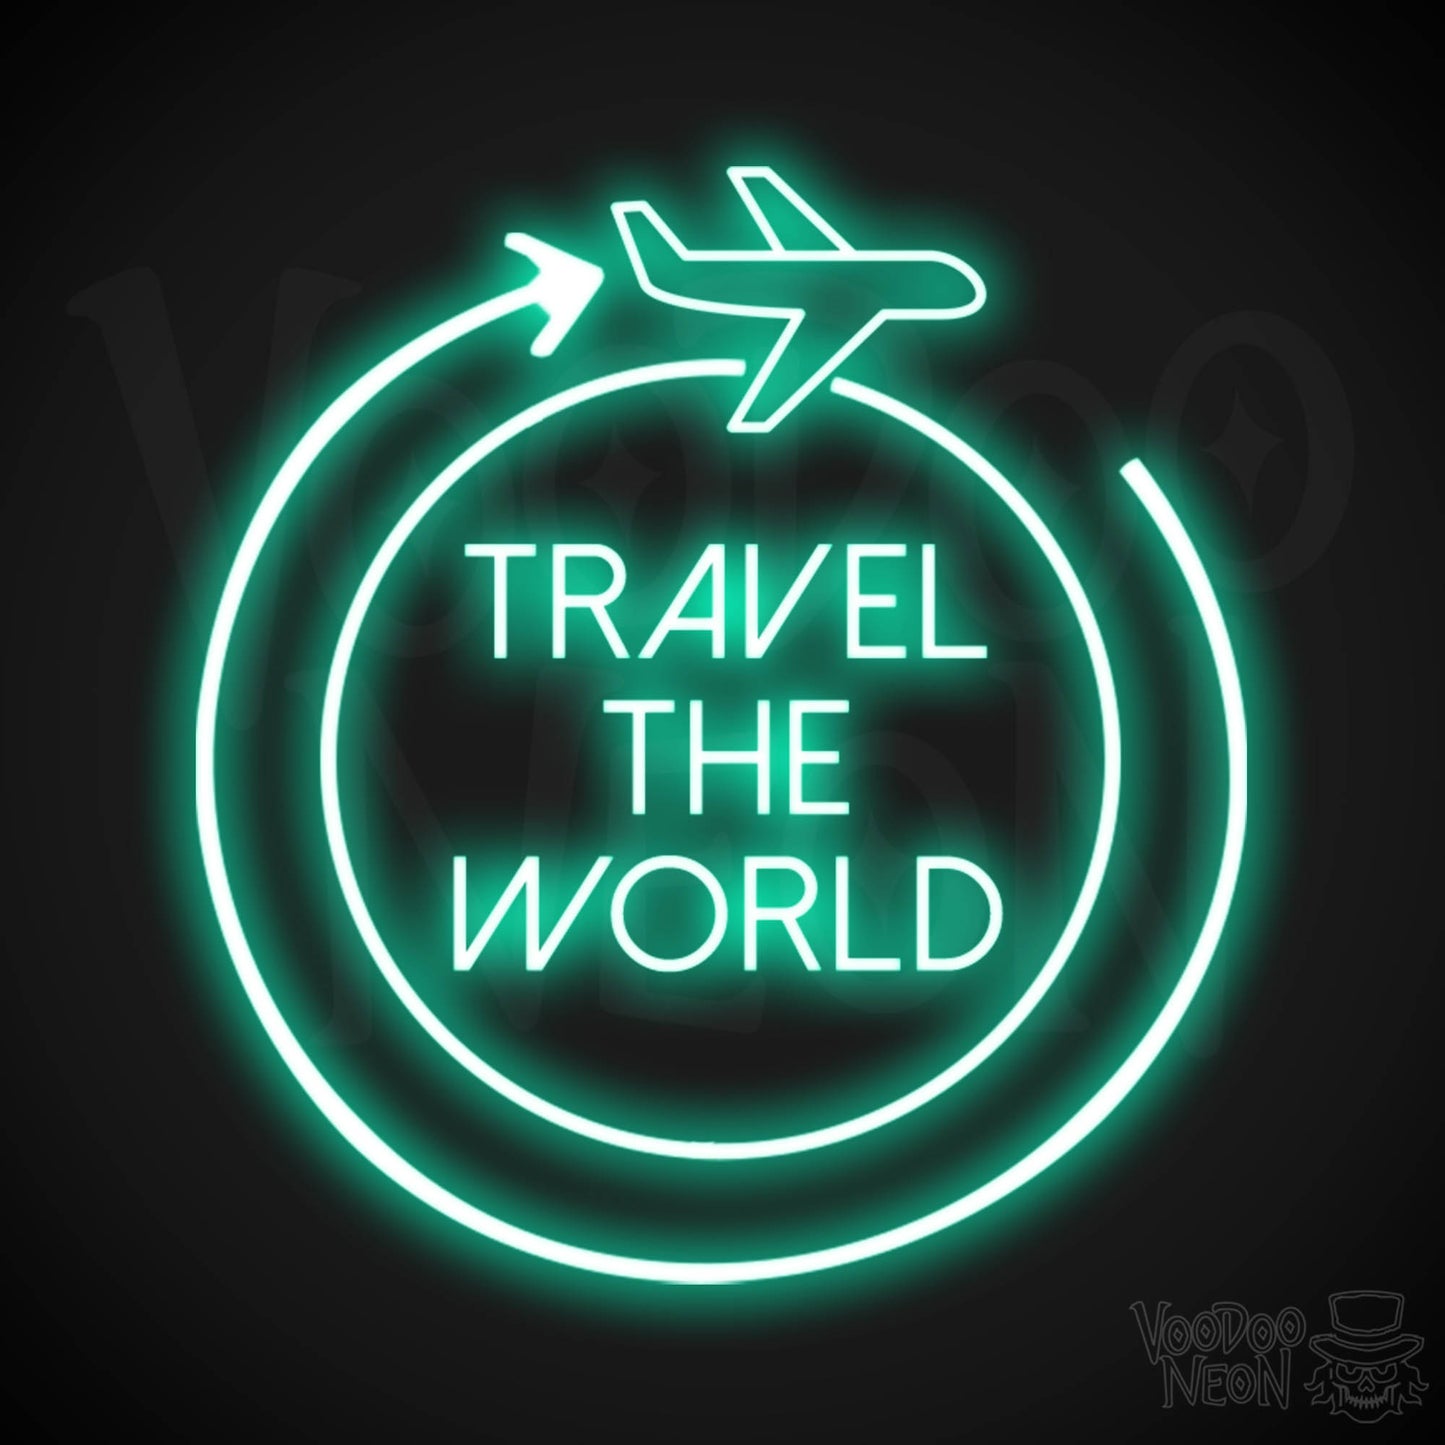 Let's Travel The World Neon Sign - LED Neon Wall Art - Color Light Green